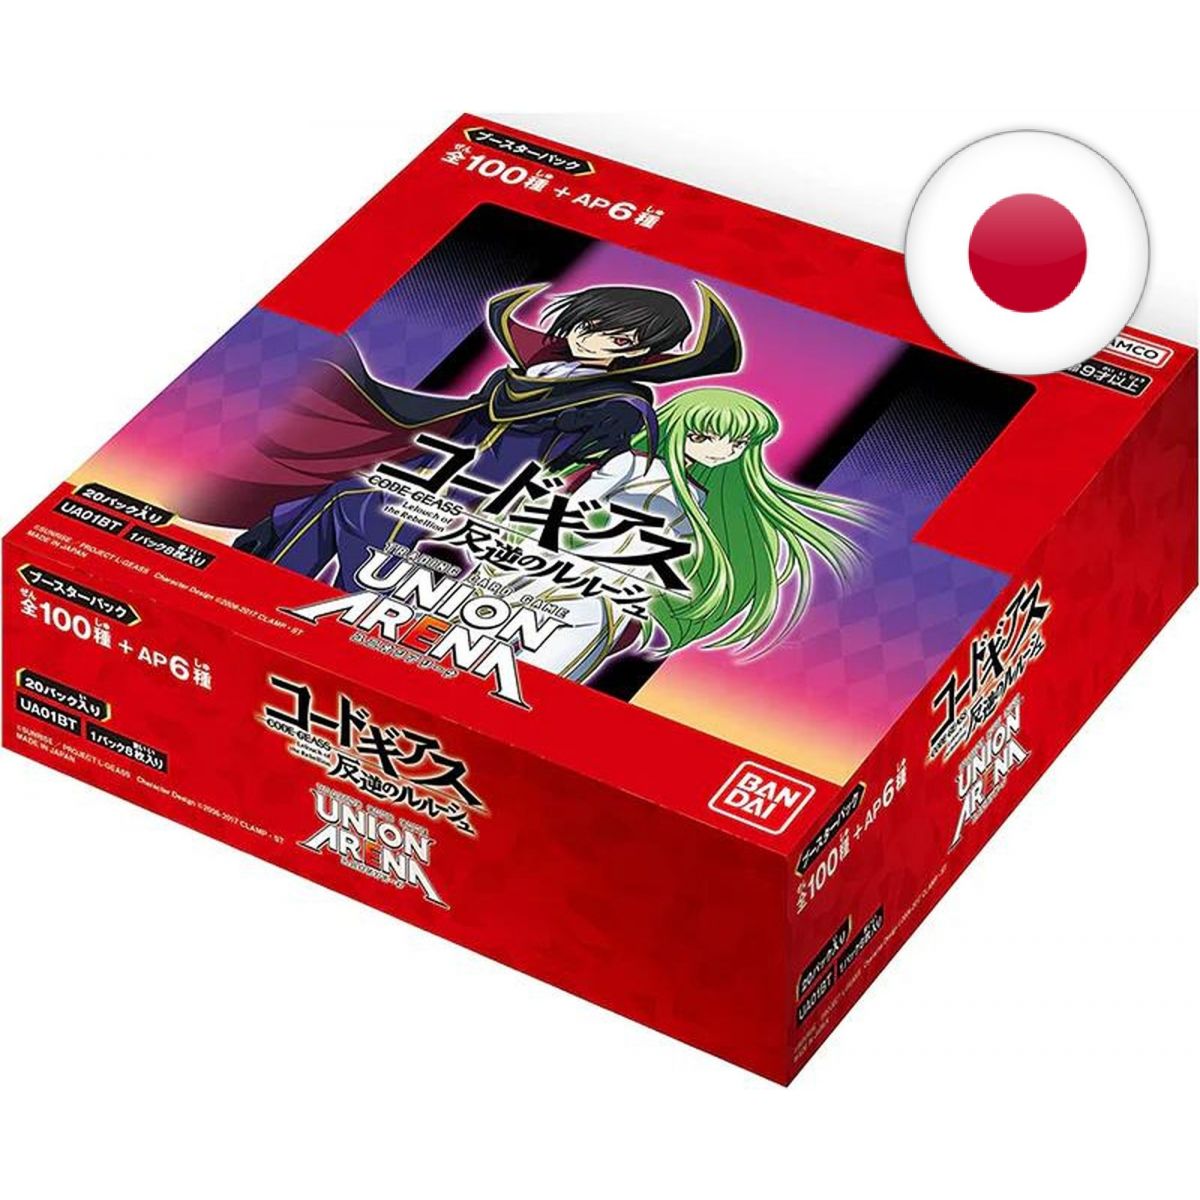 Union Arena - Display - Box of 20 Boosters - Code Geass Lelouch of the Rebellion - JP